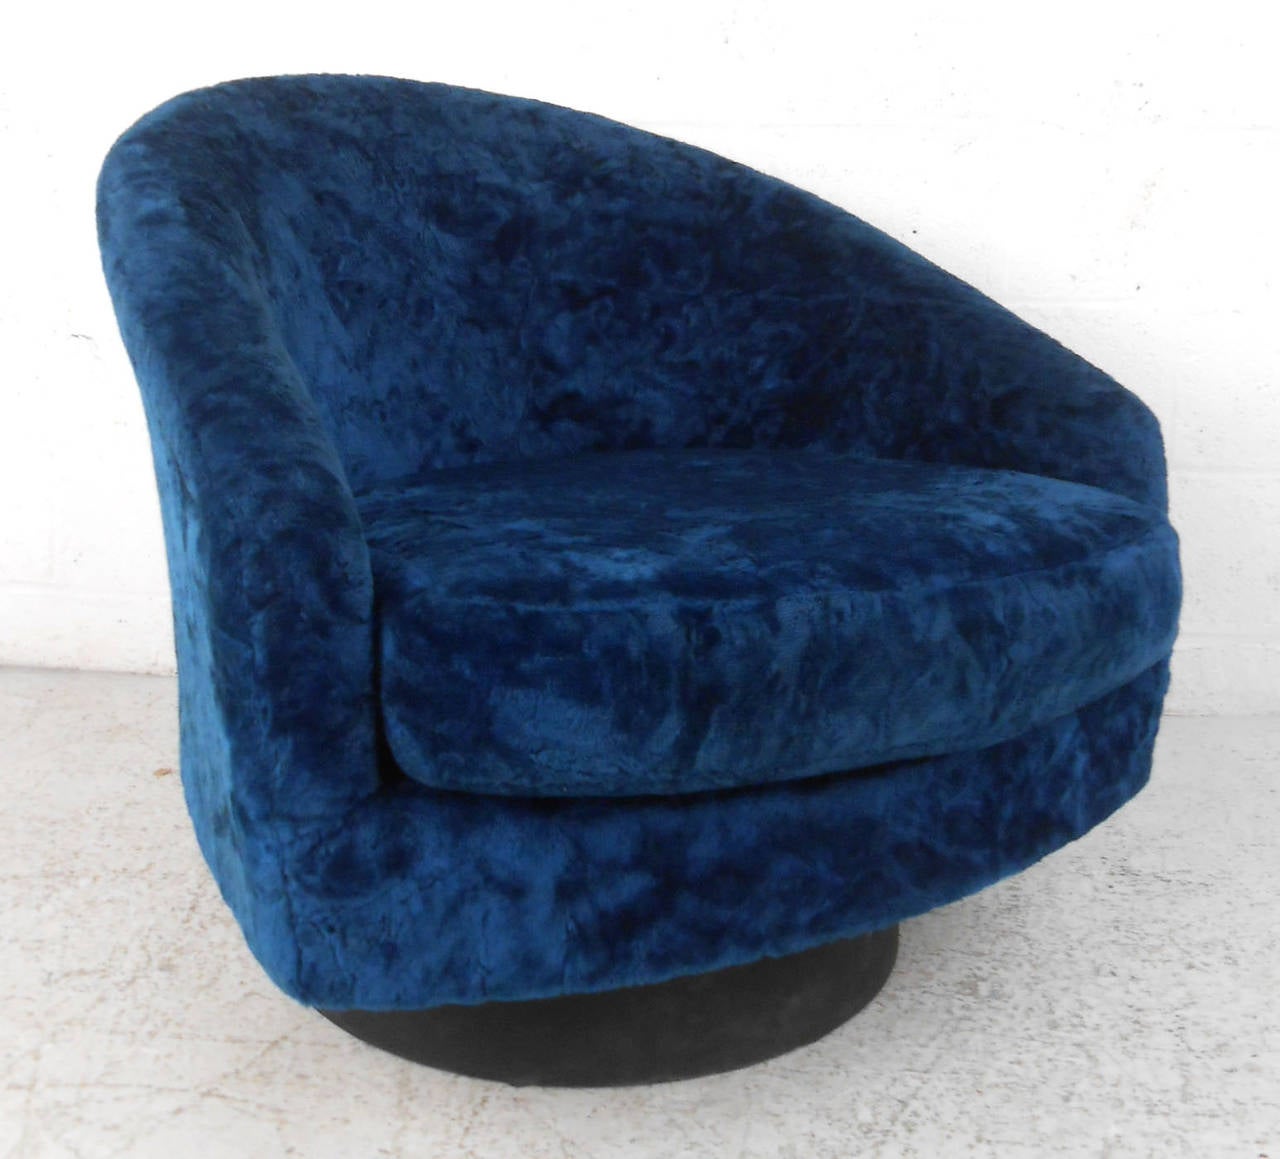 This retro swivel chair is covered in wonderful royal blue upholstery, and is mounted on a swivel wooden base. Very comfortable chair for any seating situation, please confirm item location (NY or NJ).